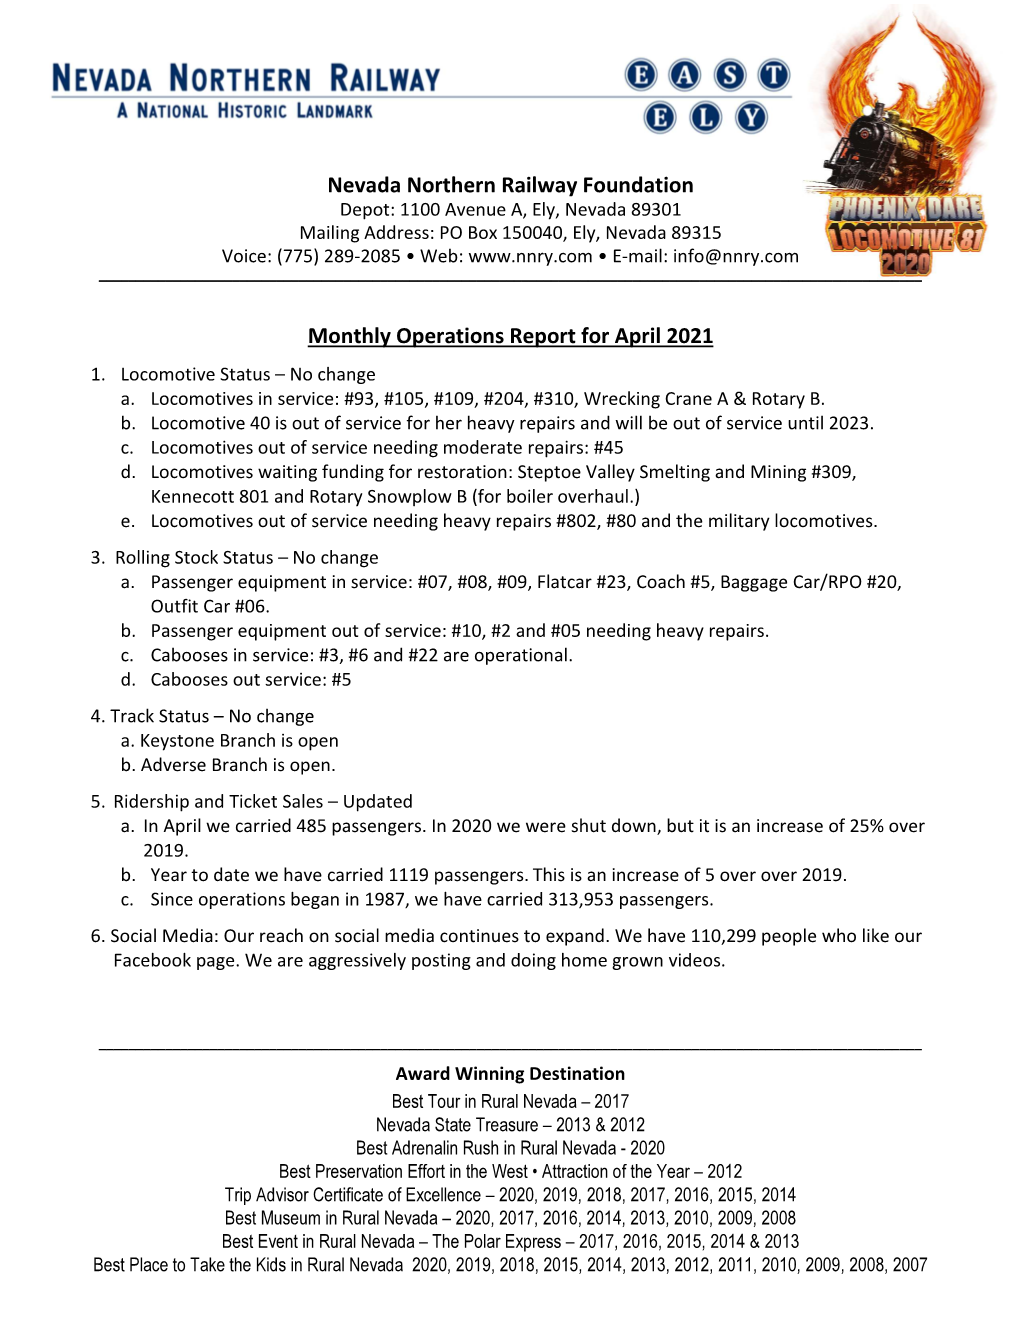 Nevada Northern Railway Foundation Monthly Operations Report for April